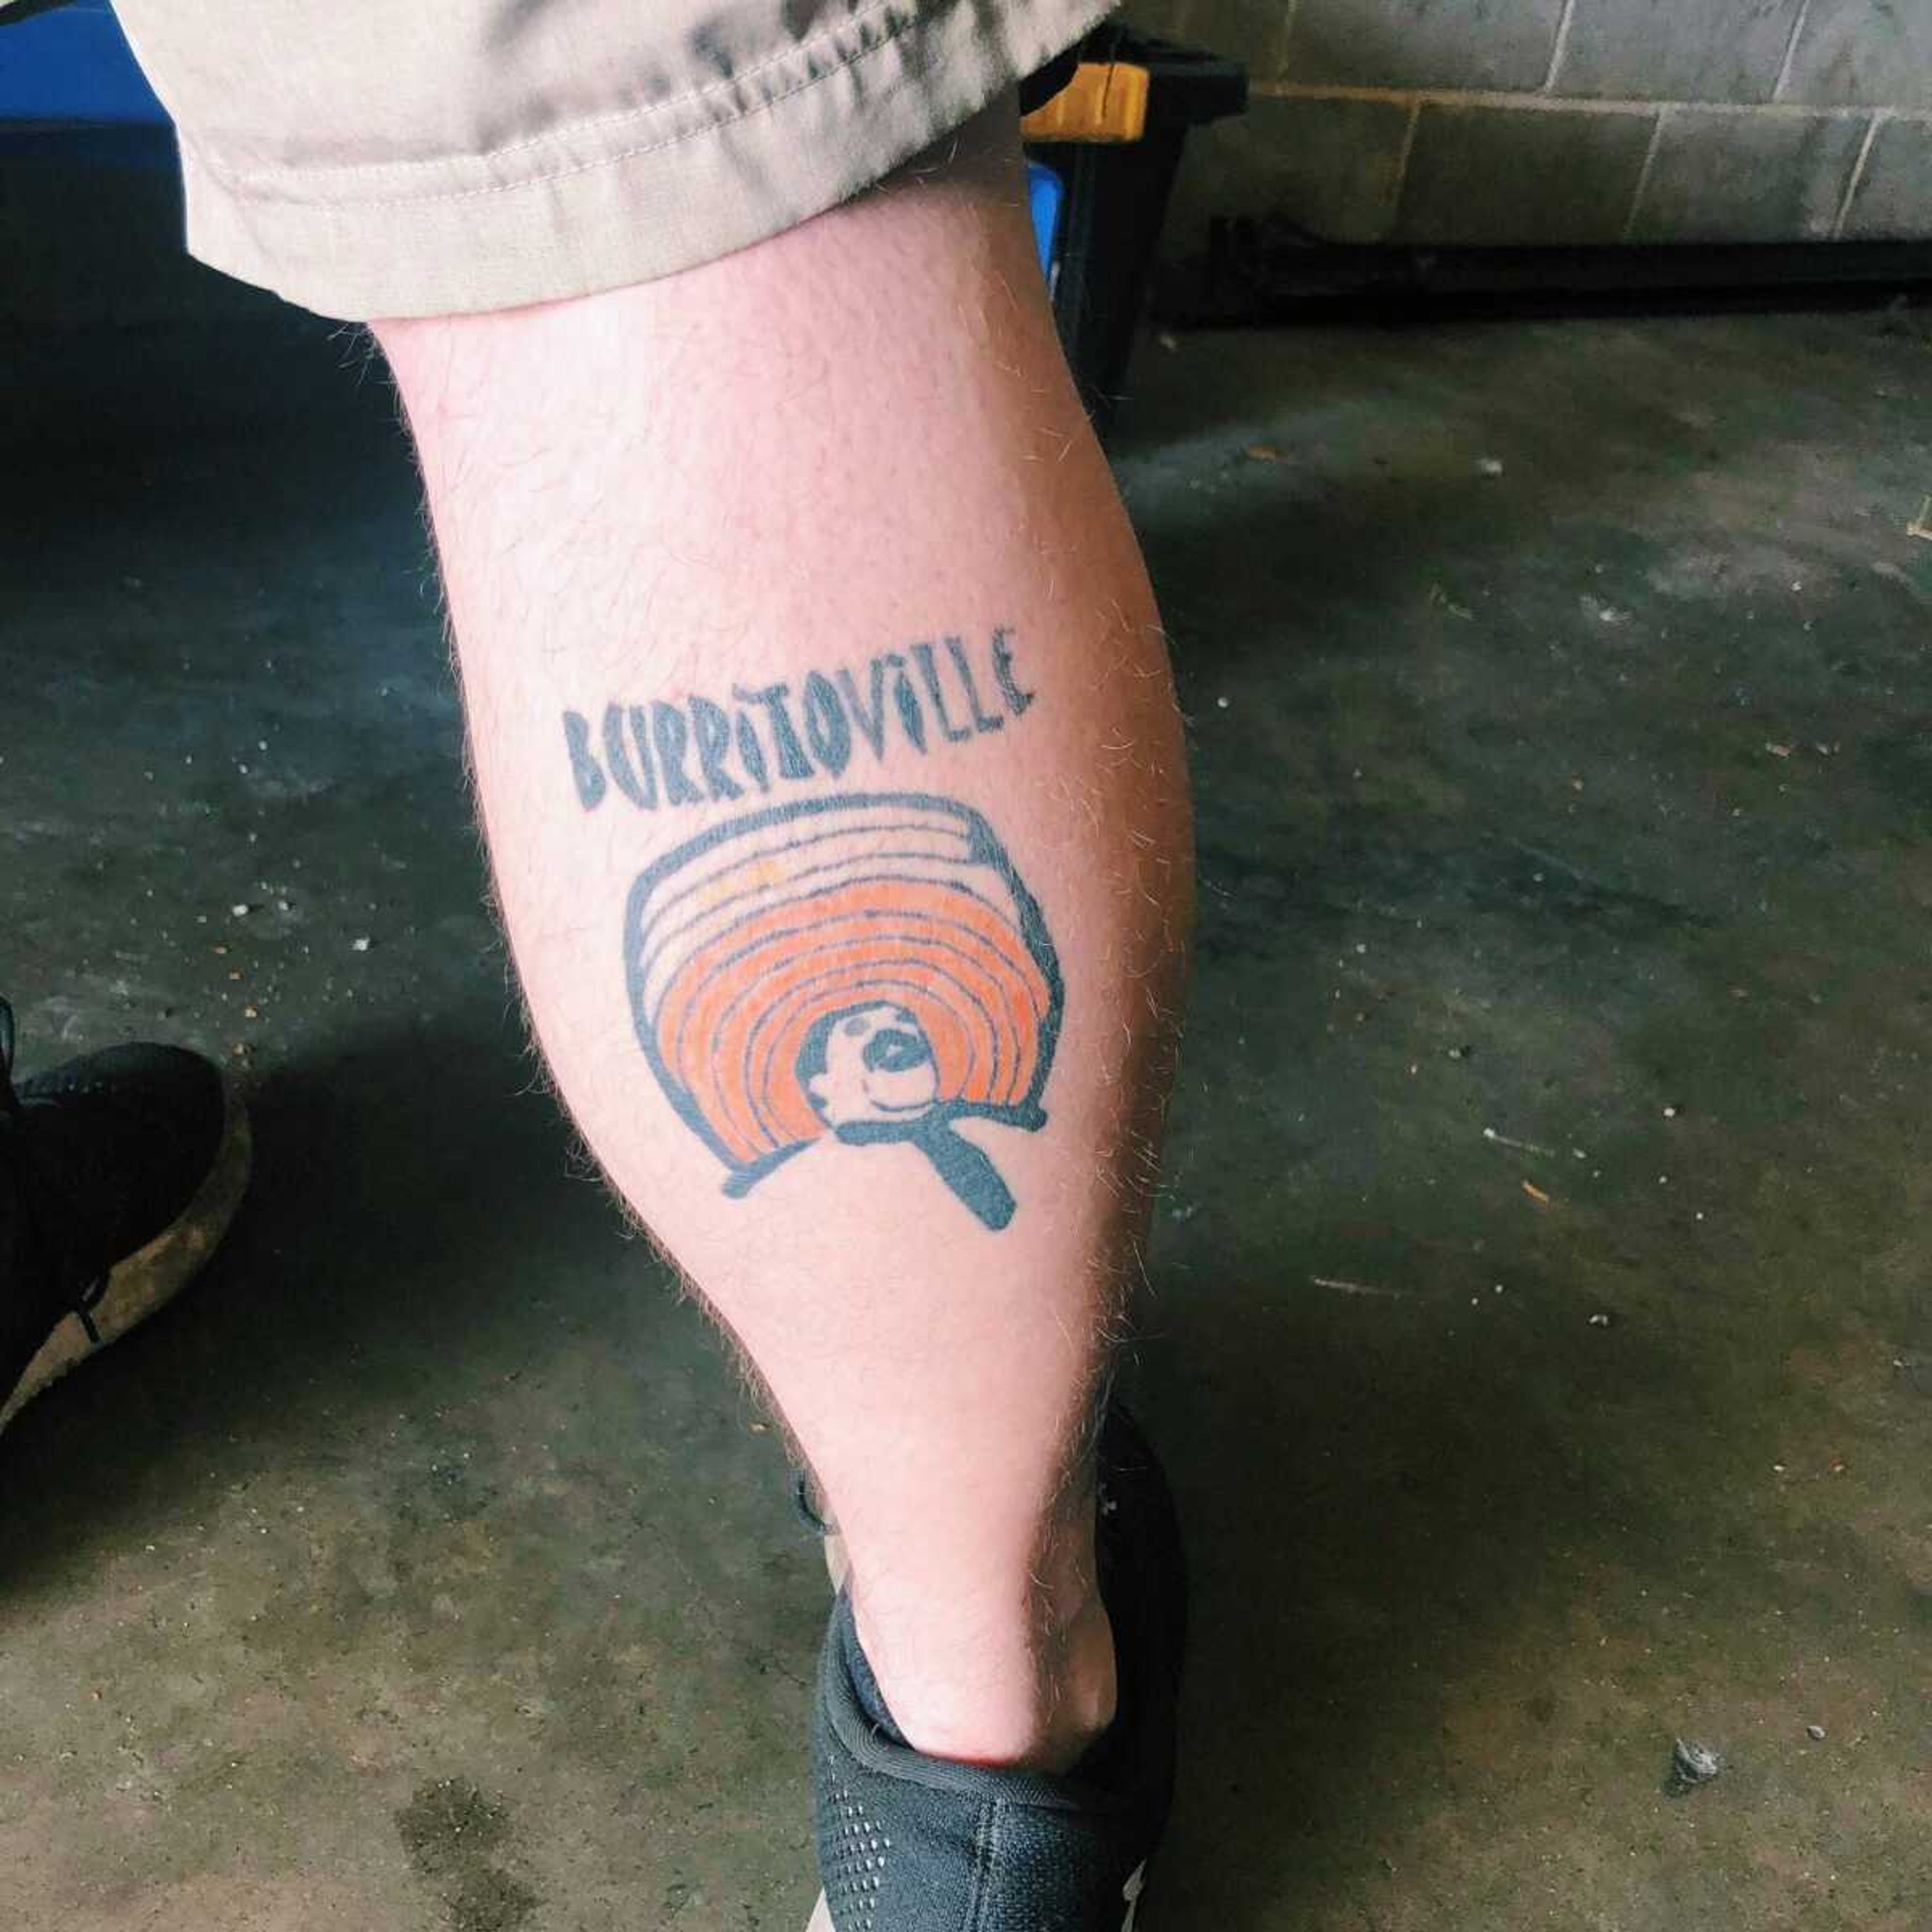 A Sept. 28 photo posted on the restaurant's Facebook page displays a customer's Burrito-Ville tattoo.